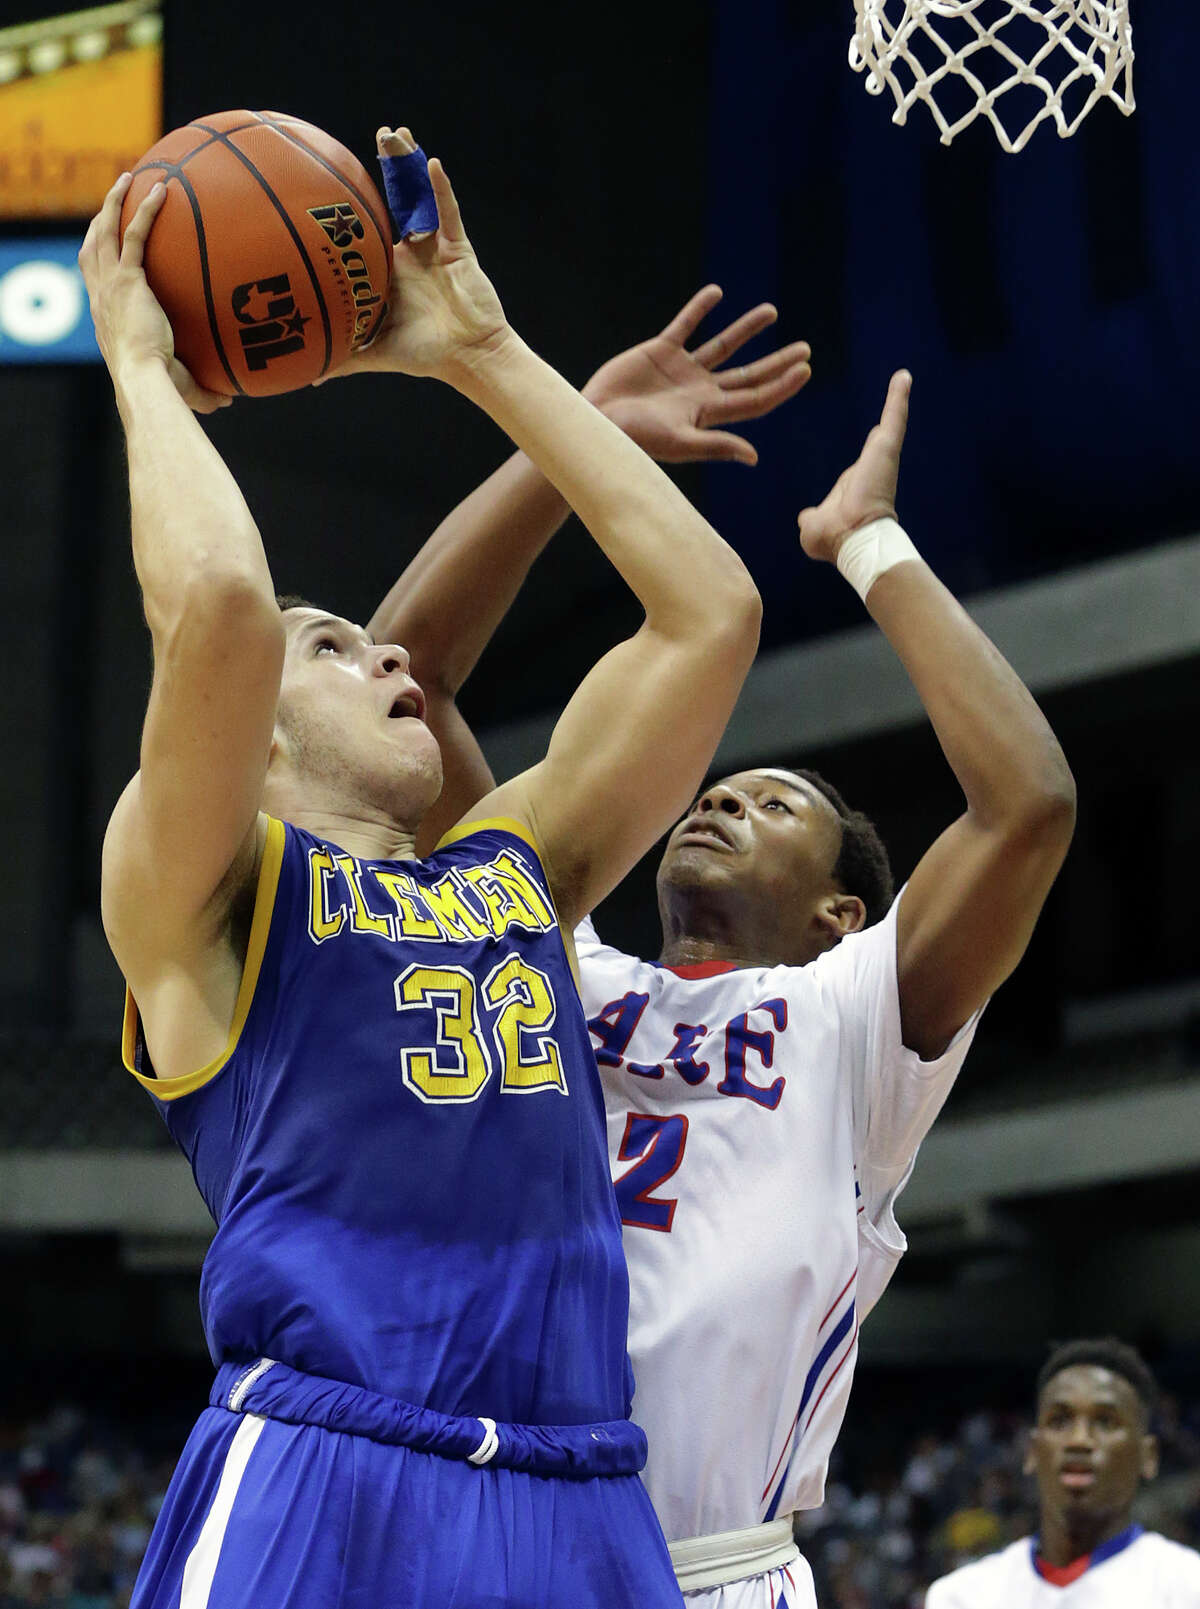 Buffalo forward Cayne Edwards takes the ball up against Bradley George as Clemens plays Houston Clear Lake in the 6A semifinals of the UIL state basketball tournament at the Alamodome in San Antonio on March 13, 2015.